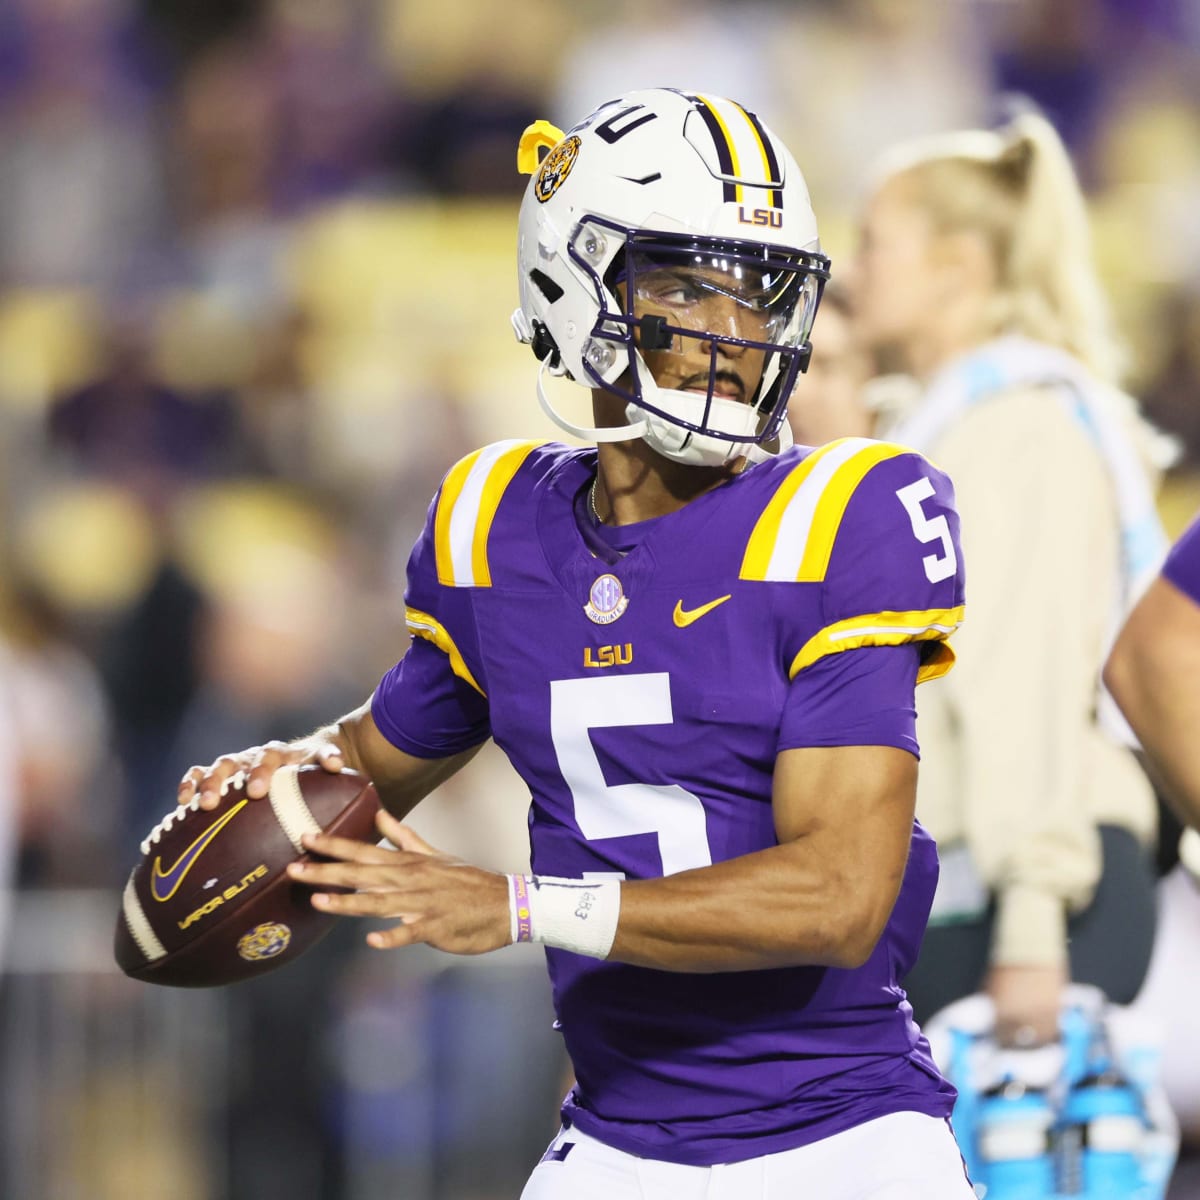 Jayden Daniels honored as top QB in college football, Payton